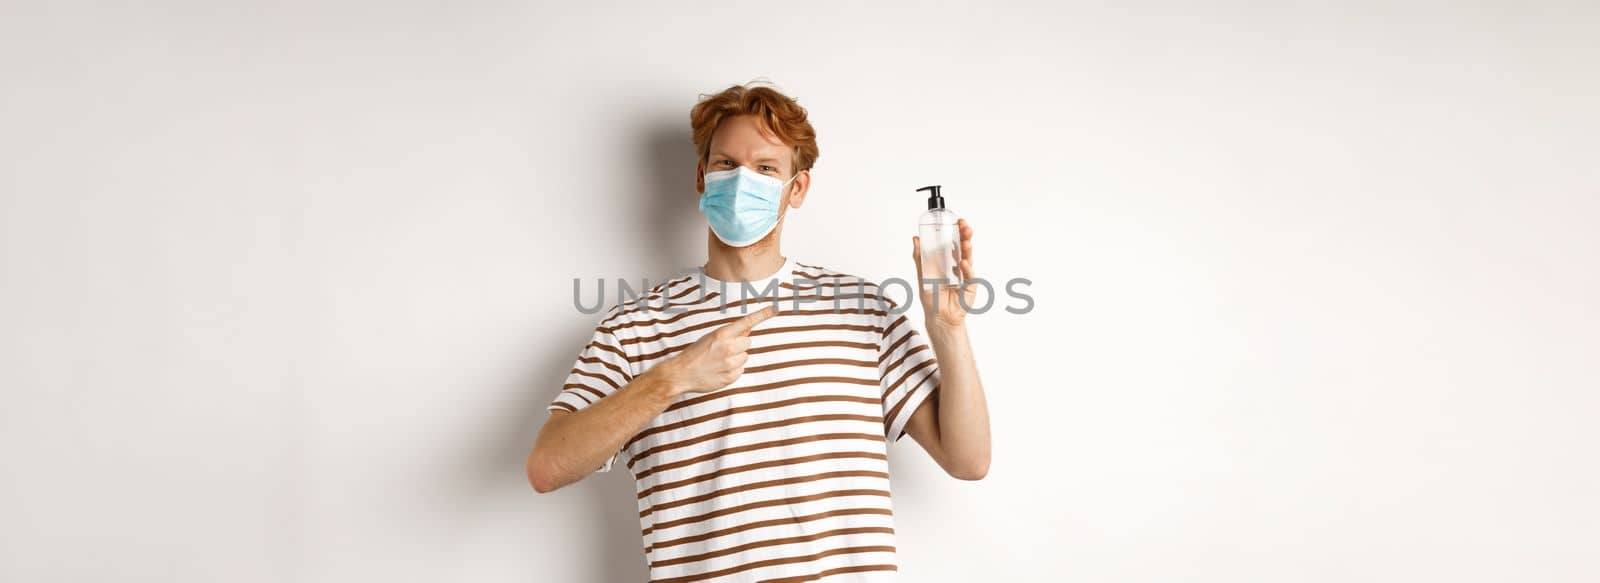 Covid-19, health and lifestyle concept. Cheerful redhead man in face mask pointing finger at hand sanitizer, recommending antiseptic, white background.